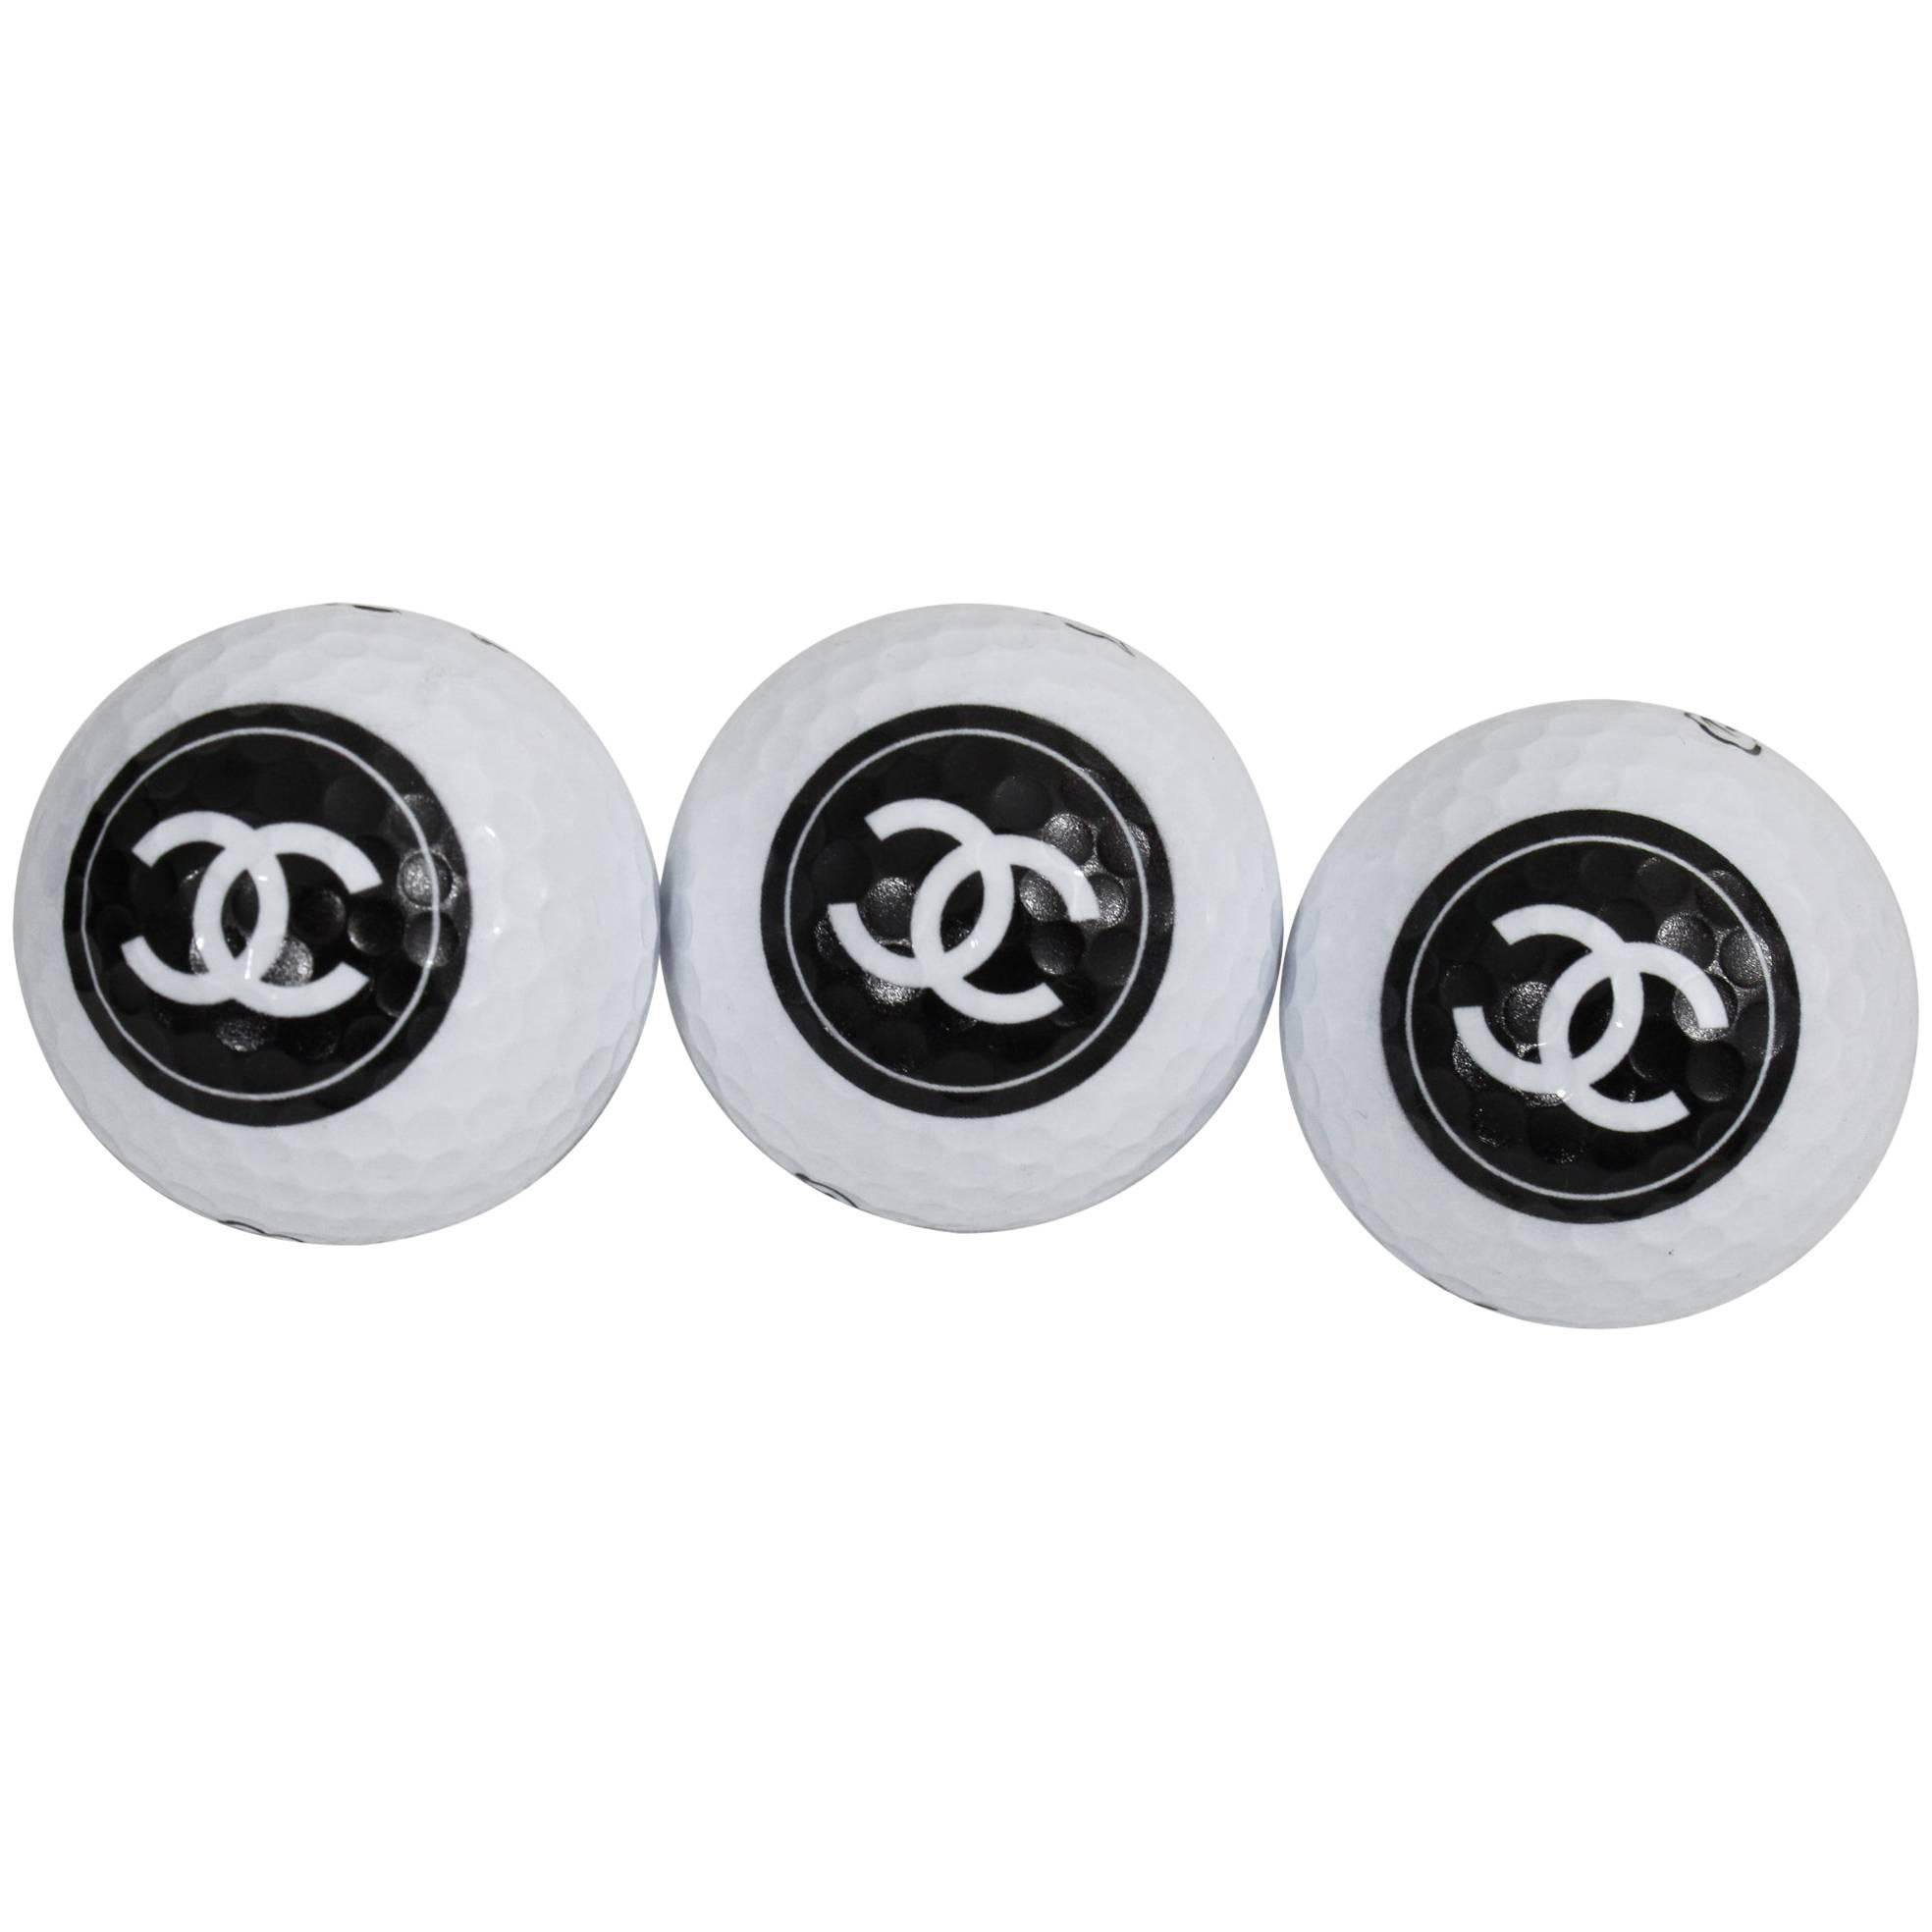 Chanel Collectible 3 Golf Balls with Box